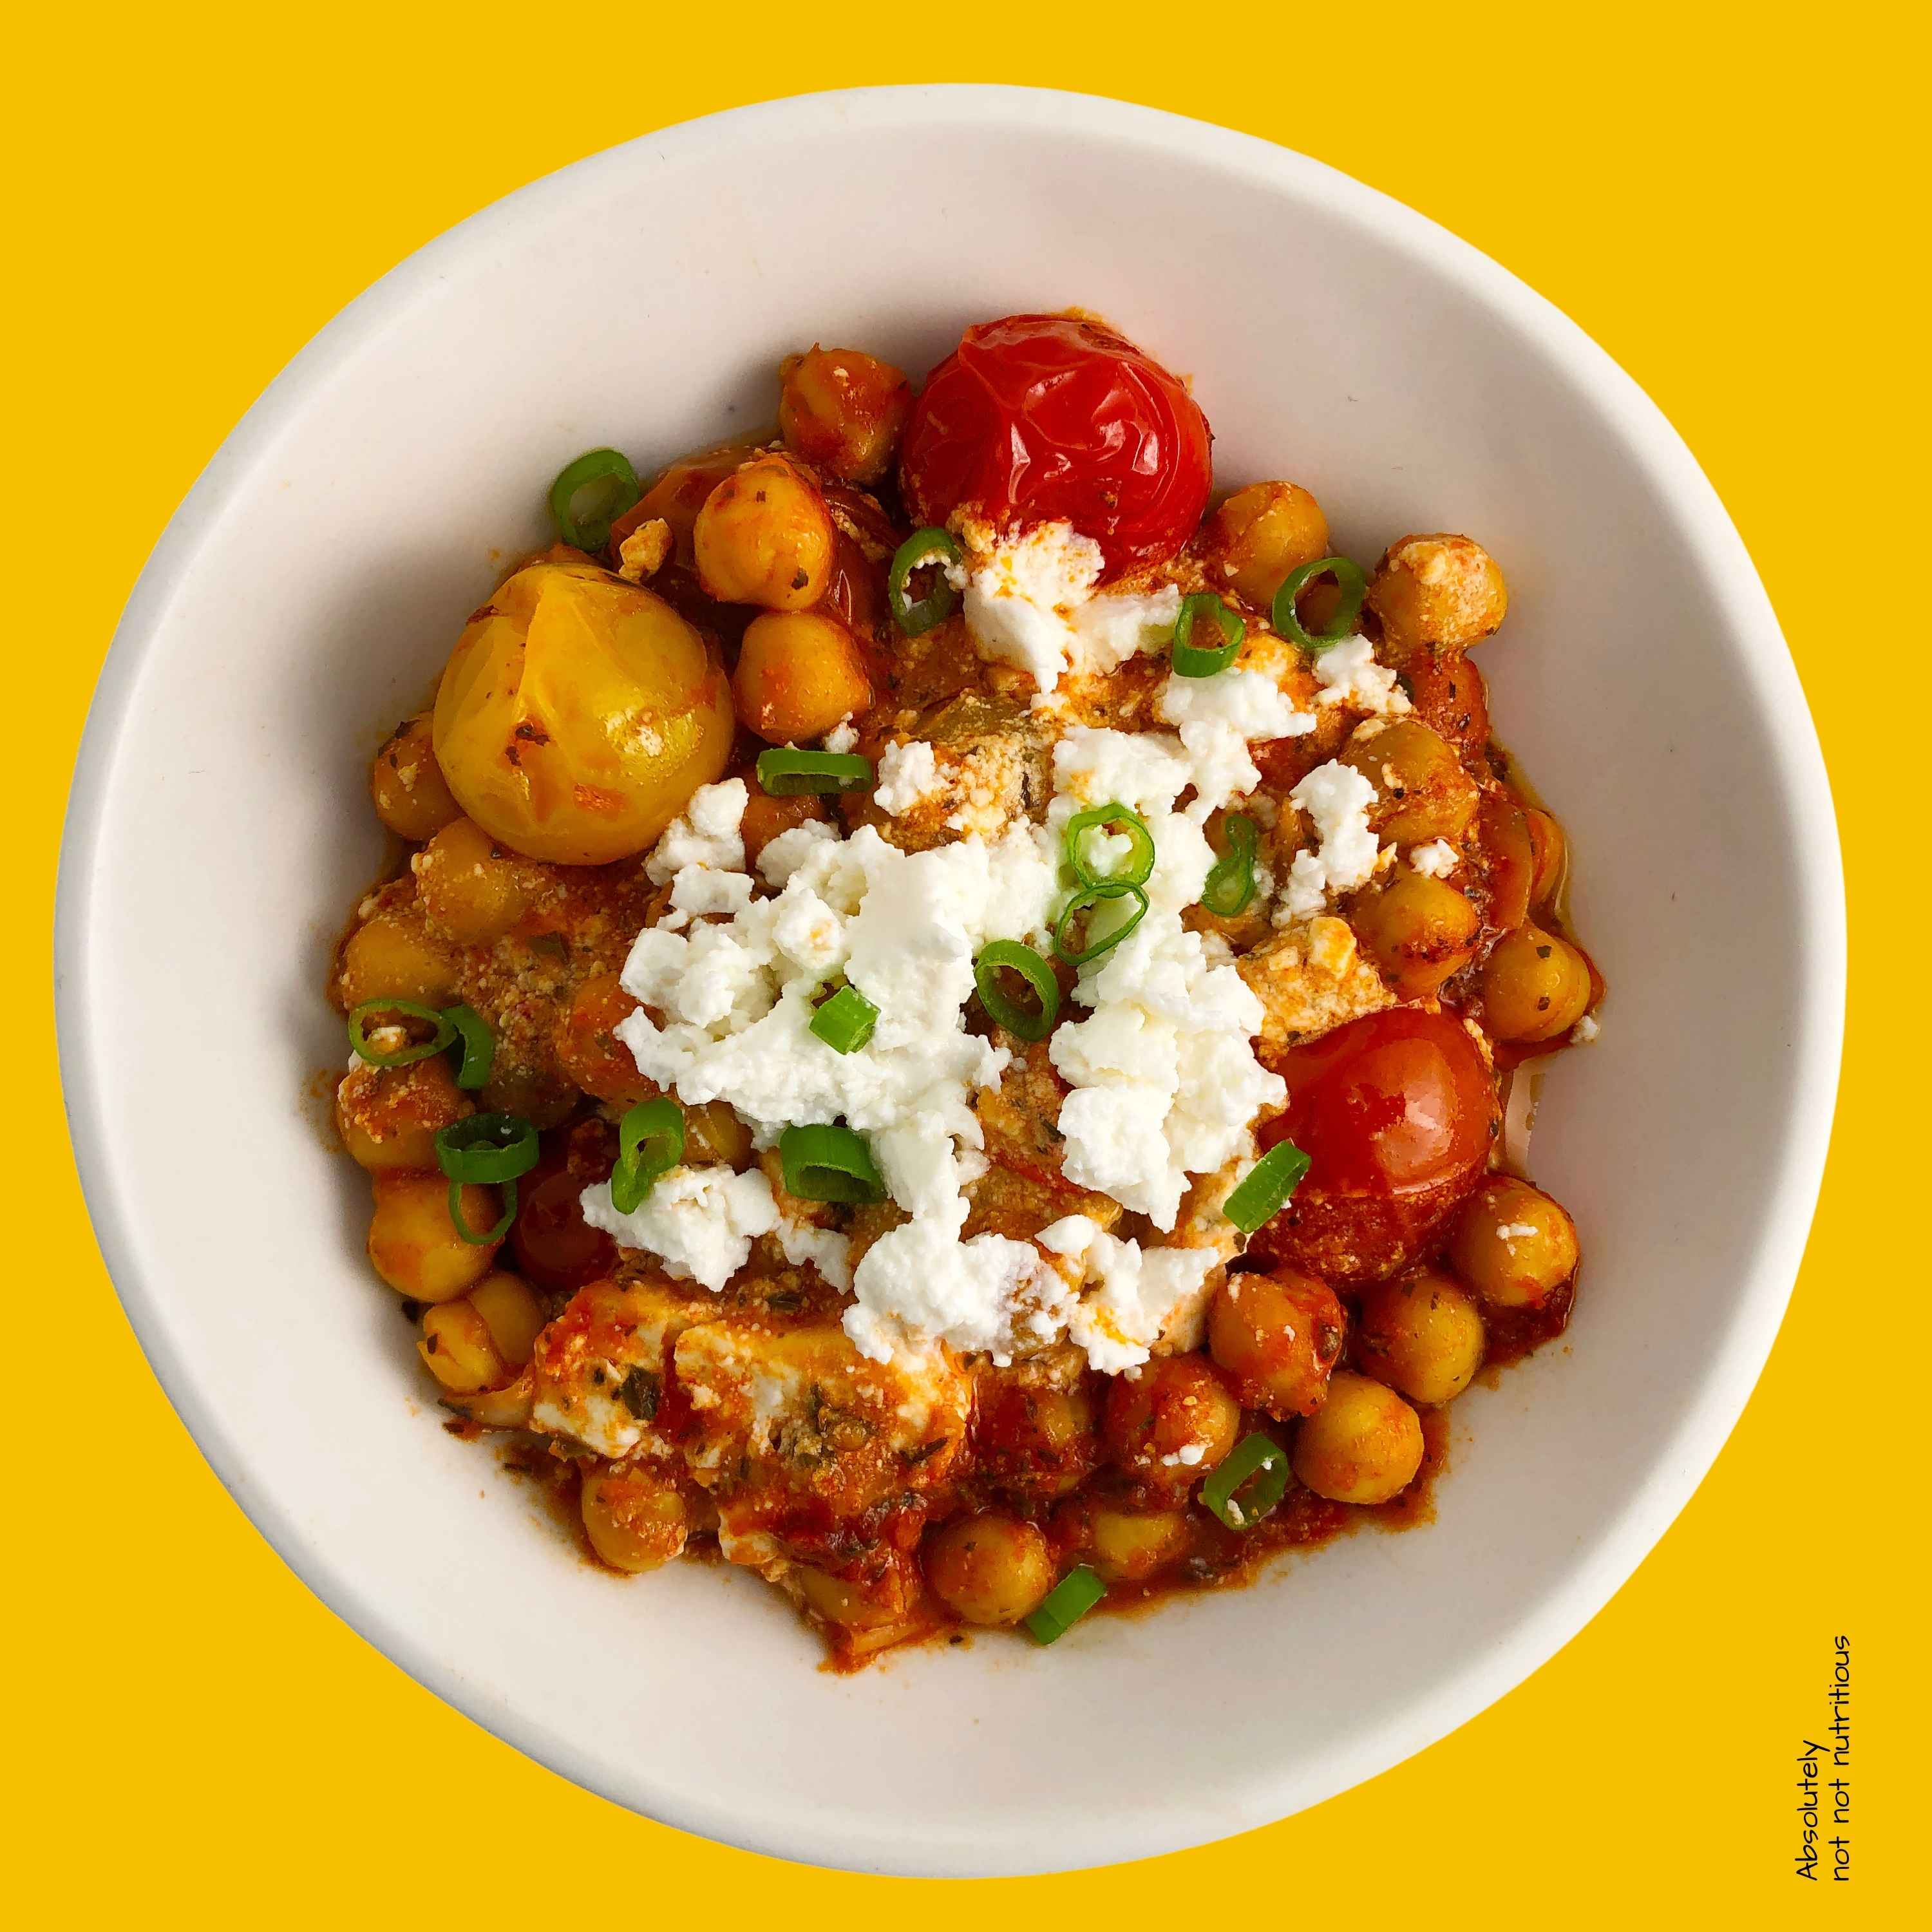 Top-down view of Chickpea Feta Bake in a white bowl. Topped with extra feta and green onions.